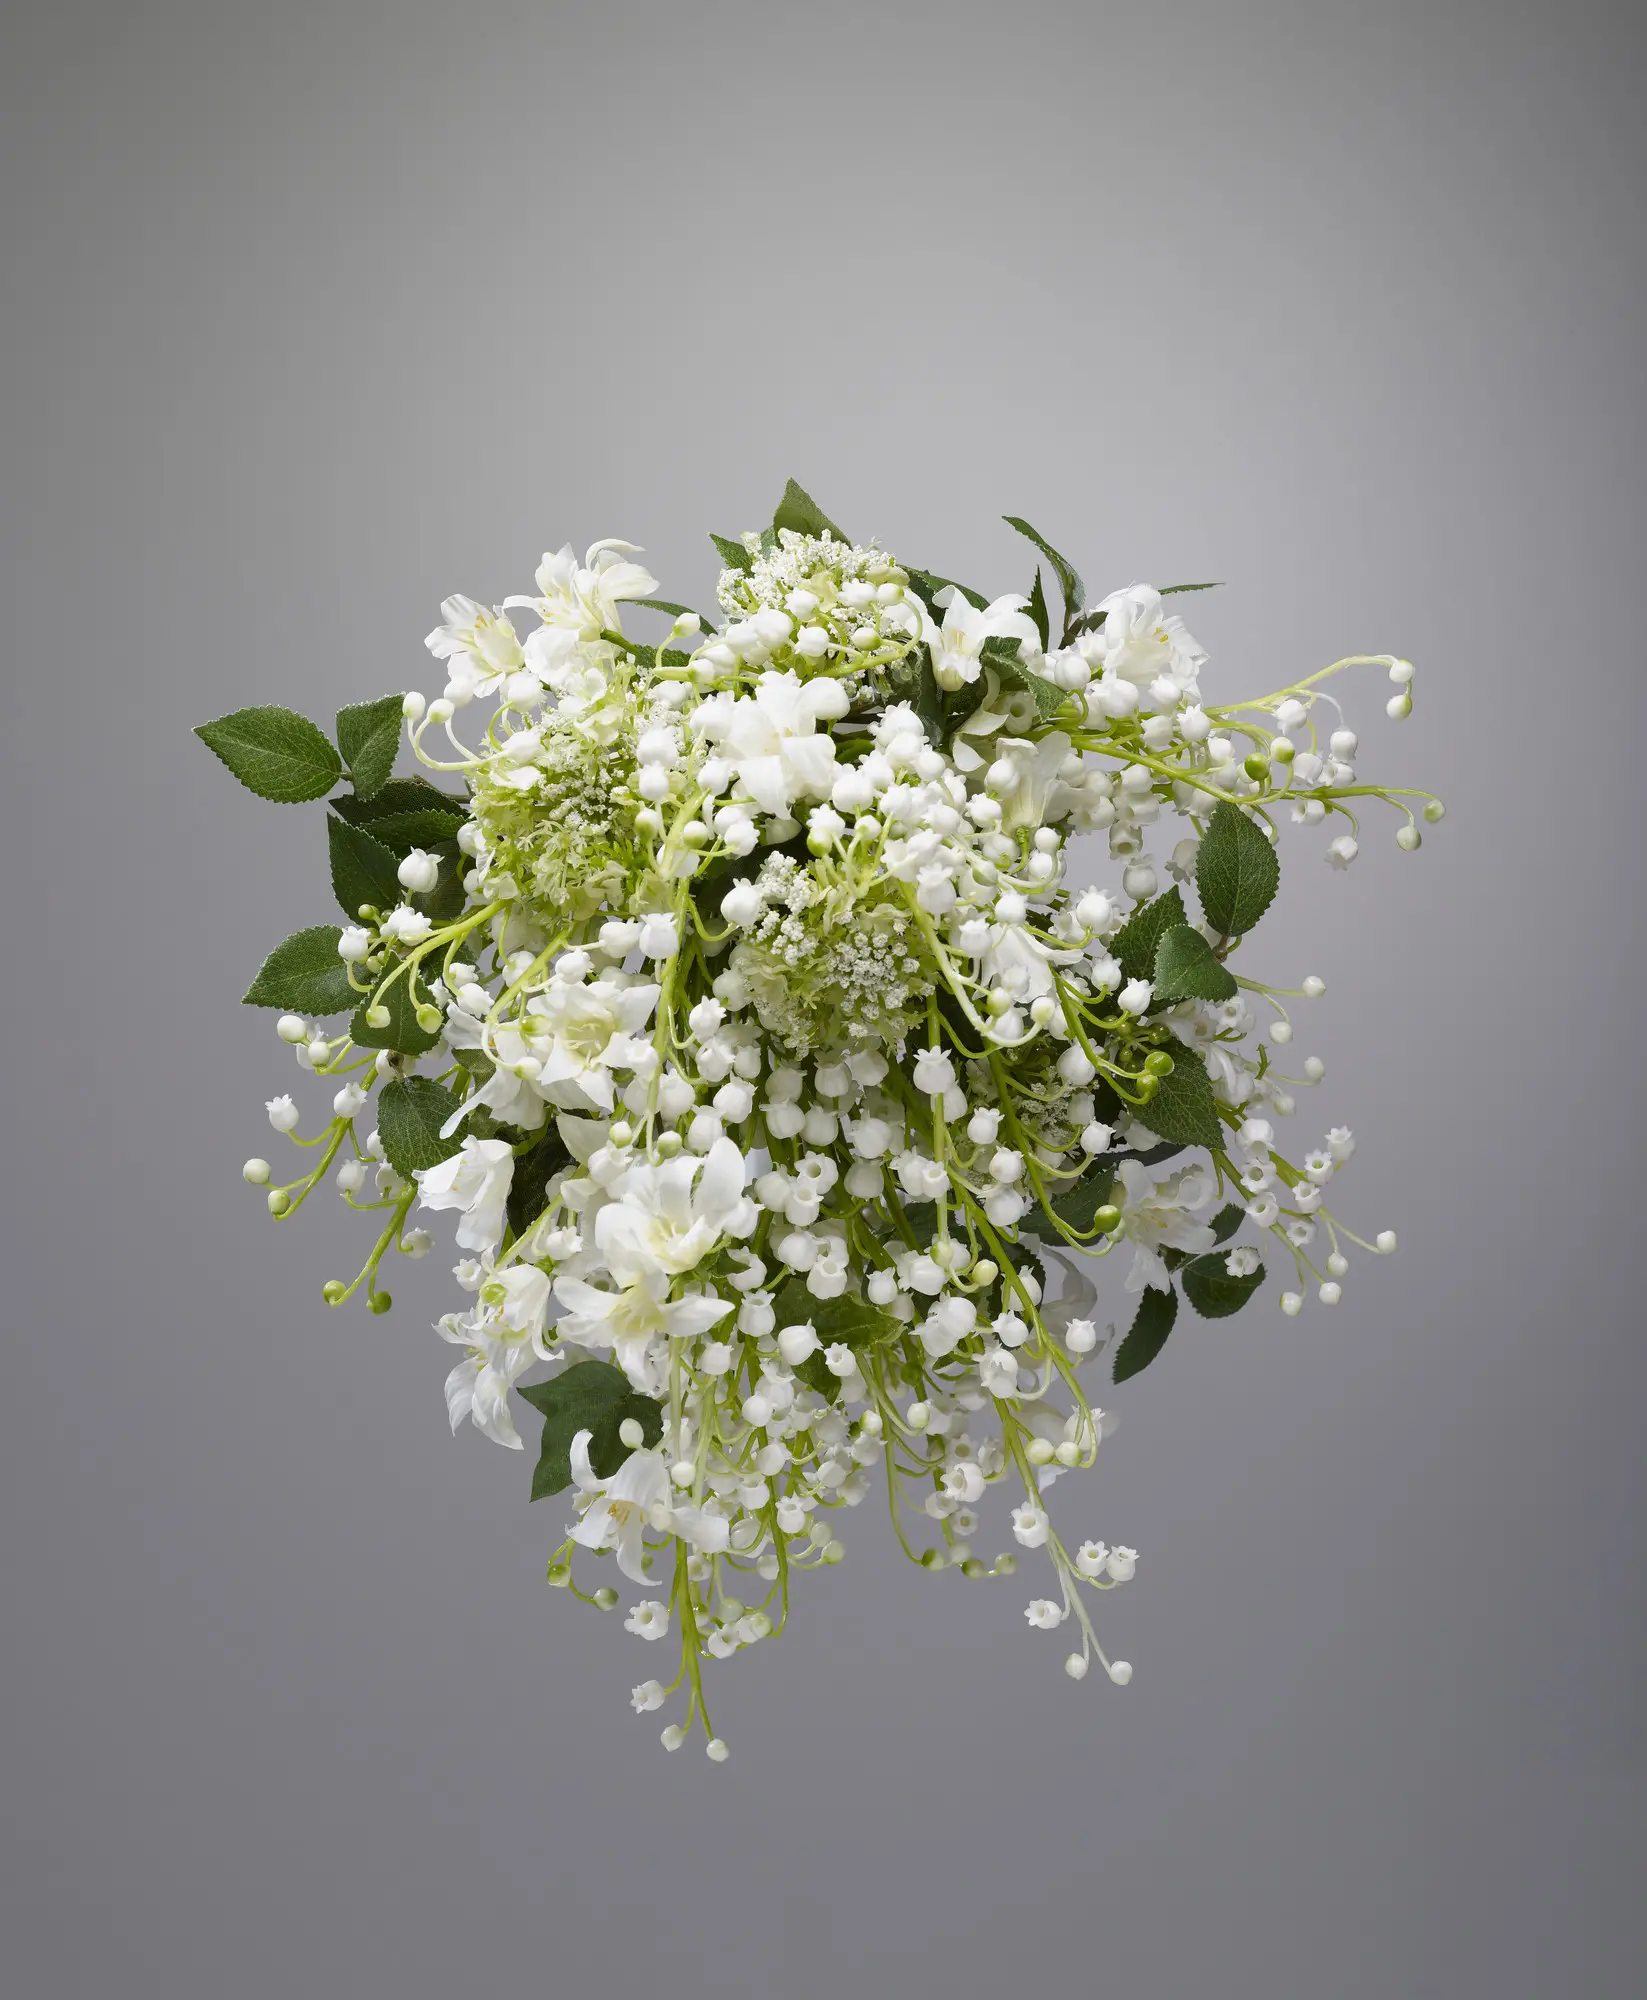 The Duchess of Cambridge carried a bouquet of myrtle, lily-of-the-valley, sweet William, ivy, myrtle and hyacinth designed by Shane Connolly from the flowers of significance for the Royal family and the Middleton family